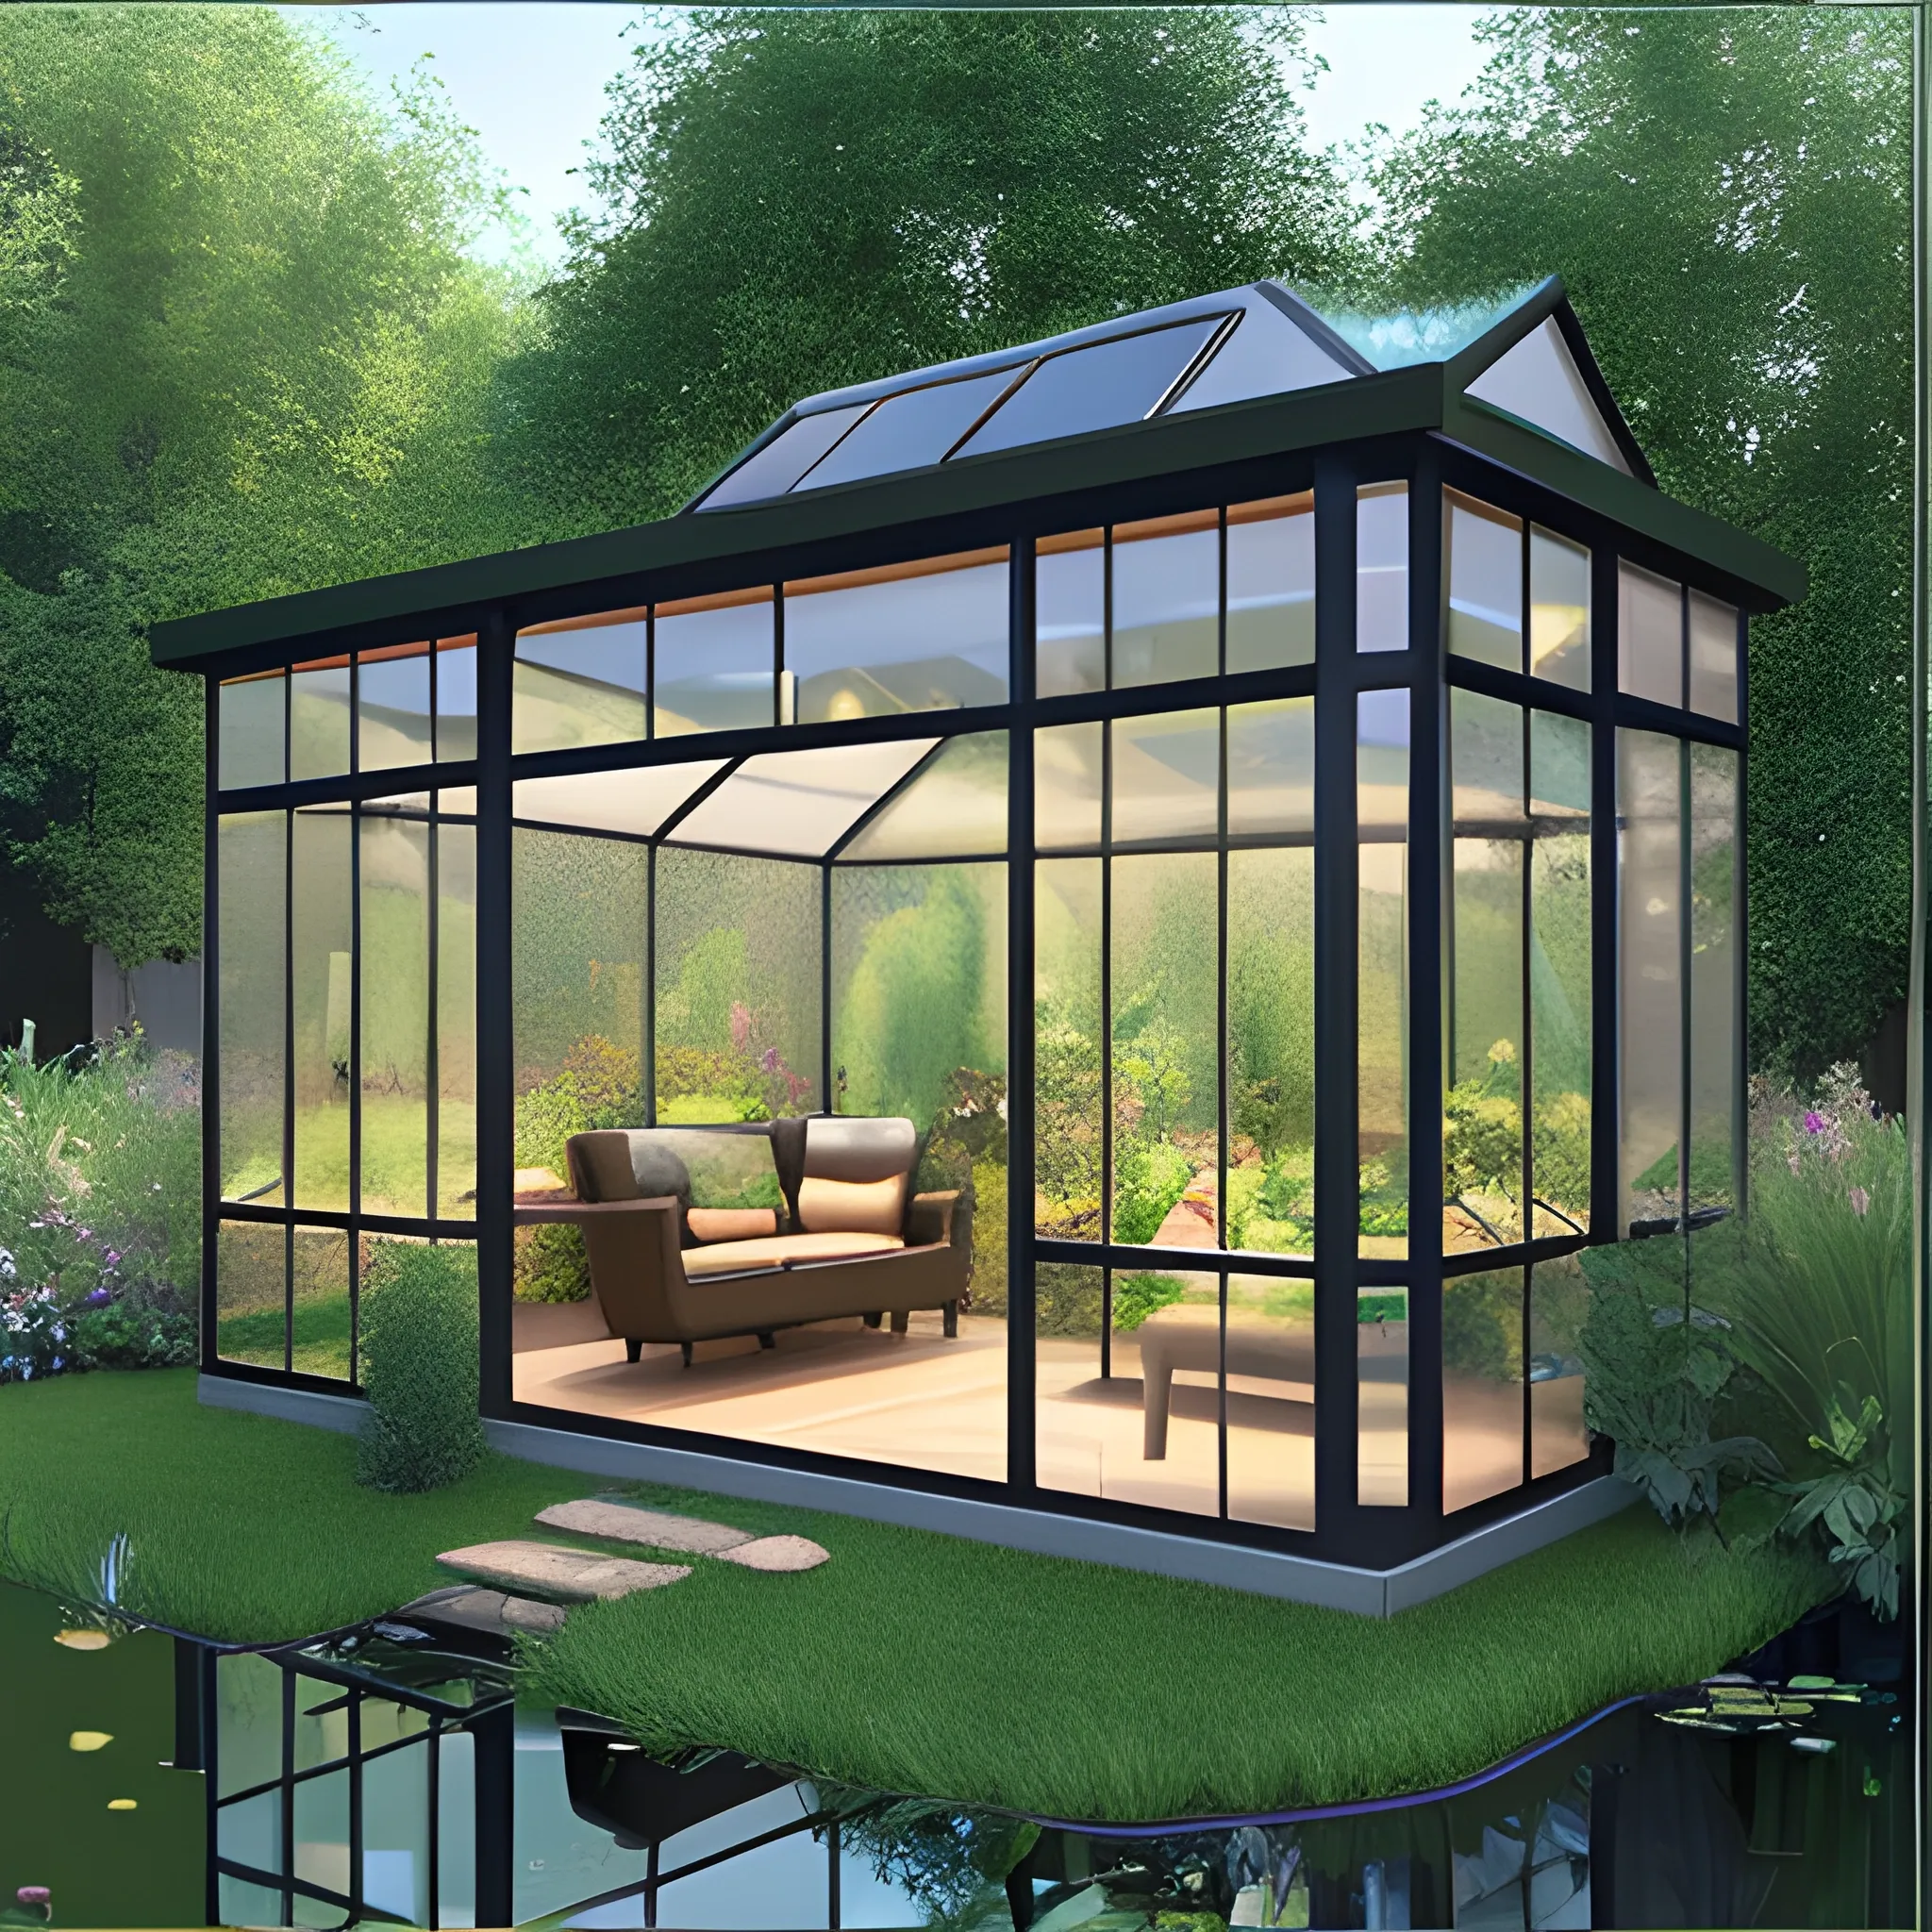 Garden office with glass walls and a pond outside, 3D